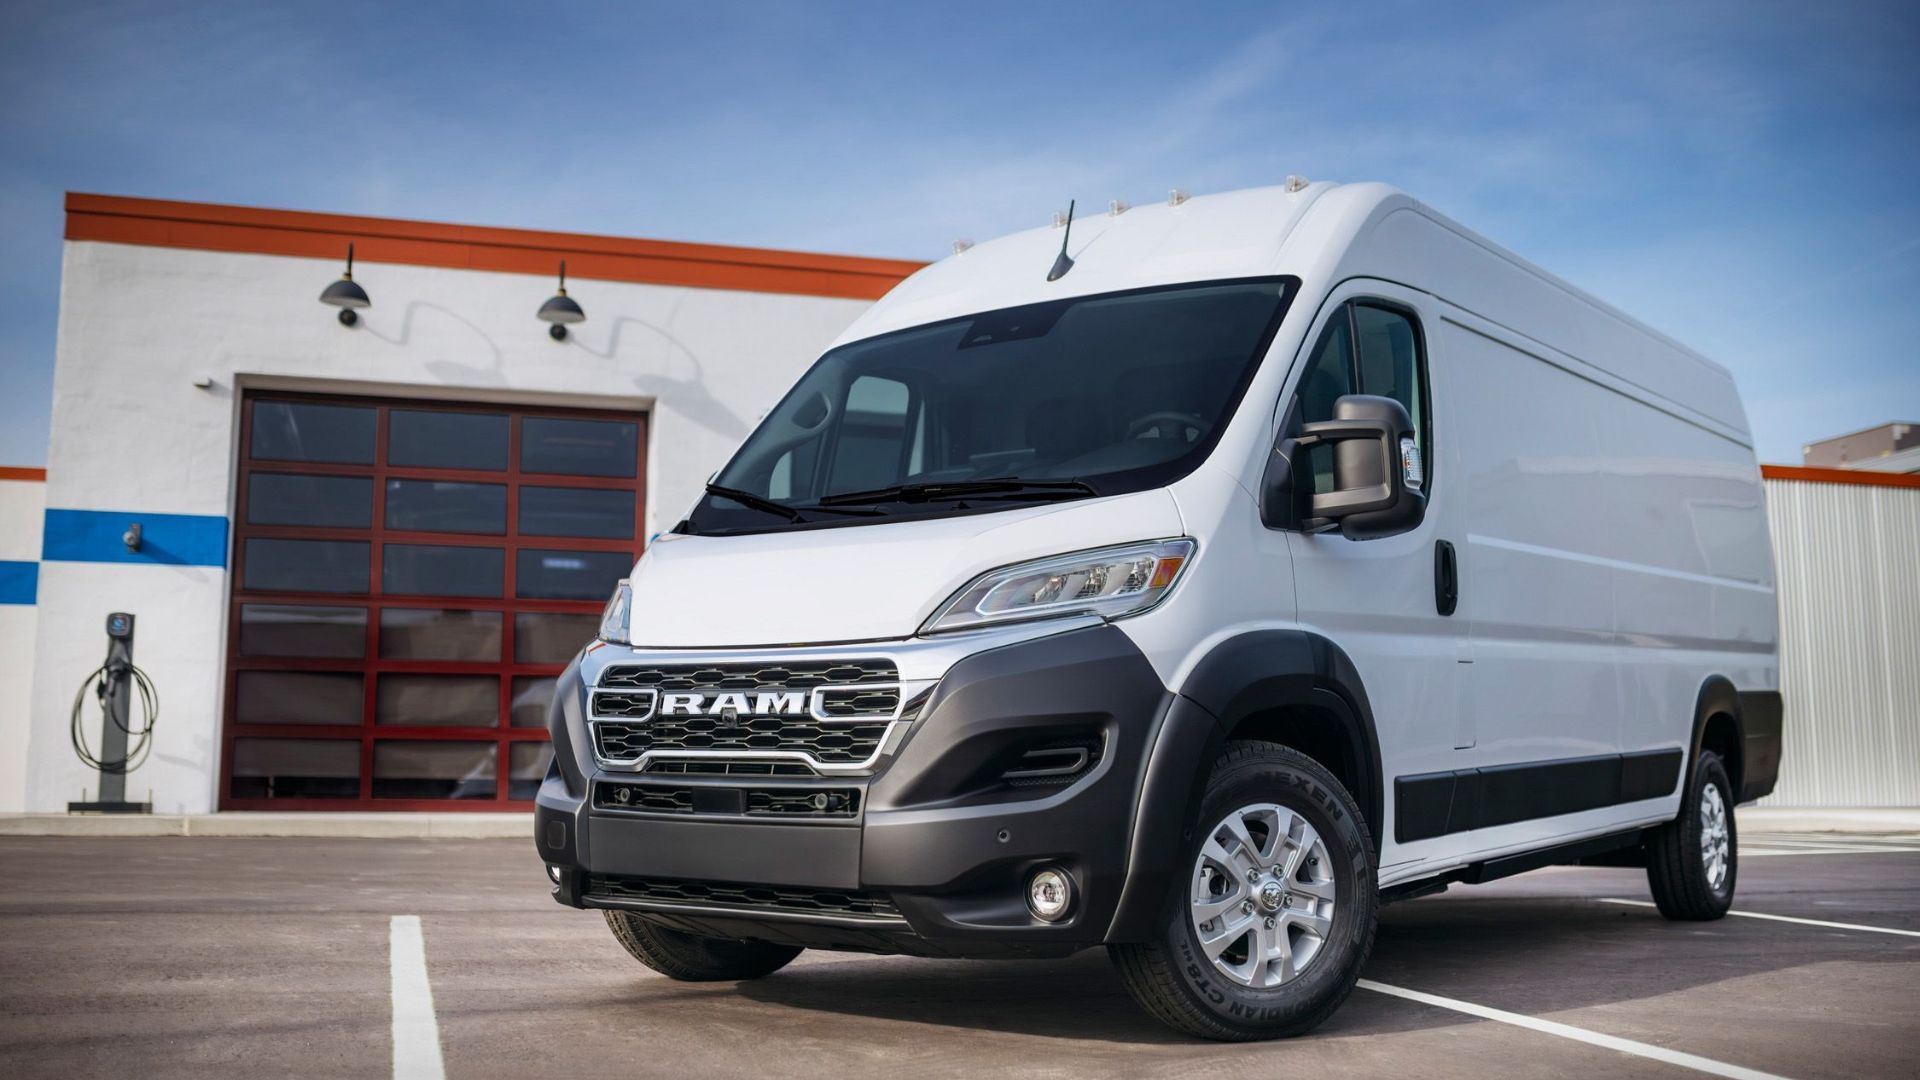 Ram Ventures Into EVs Yet Again, This Time With The ProMaster Electric Van